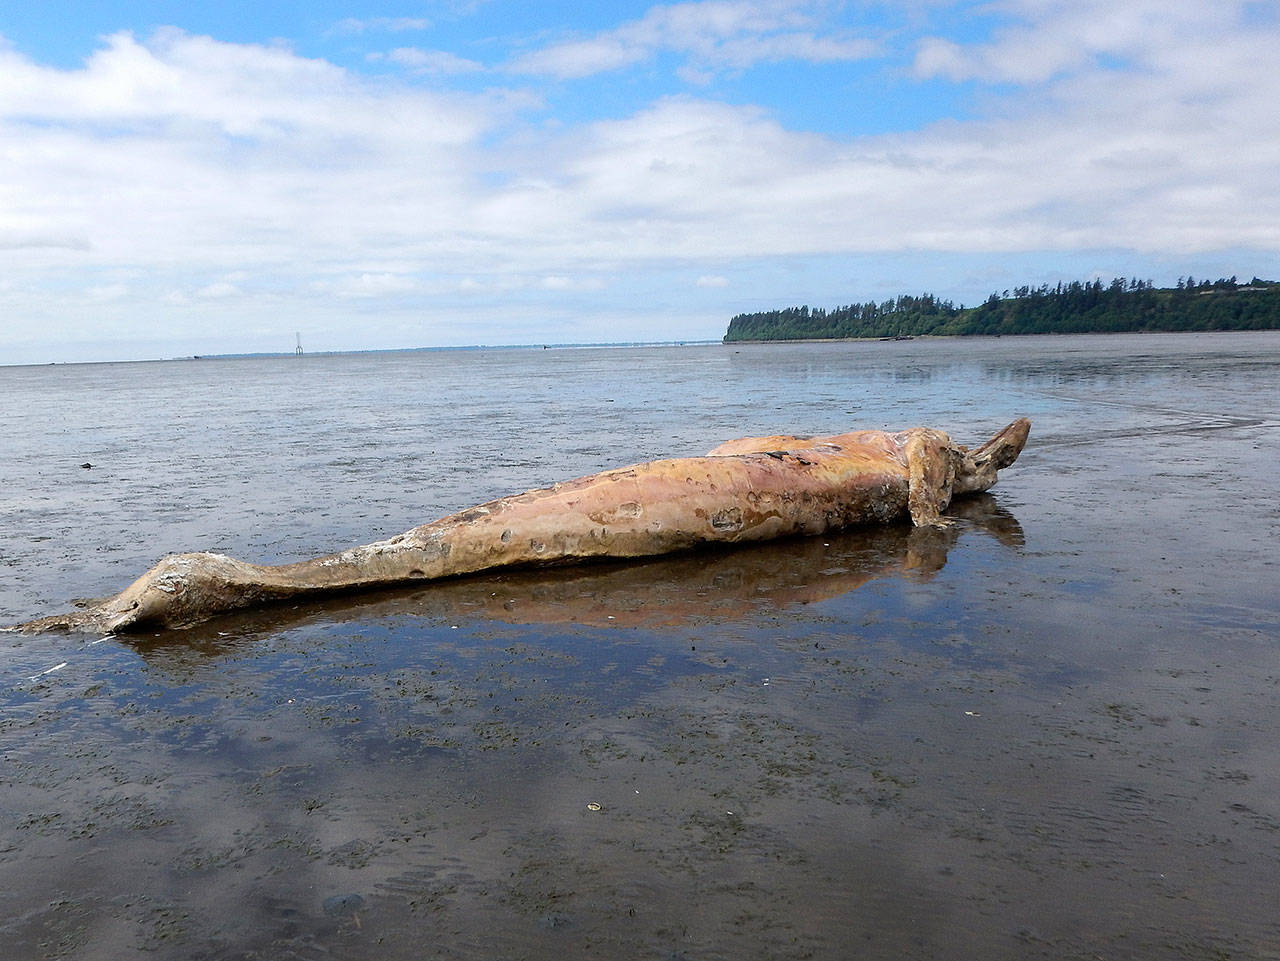 The remains of a juvenile female gray whale were discovered near the western shore of Bowerman Airport in Hoquiam on Monday. (Jessie Huggins/Cascadia Research)